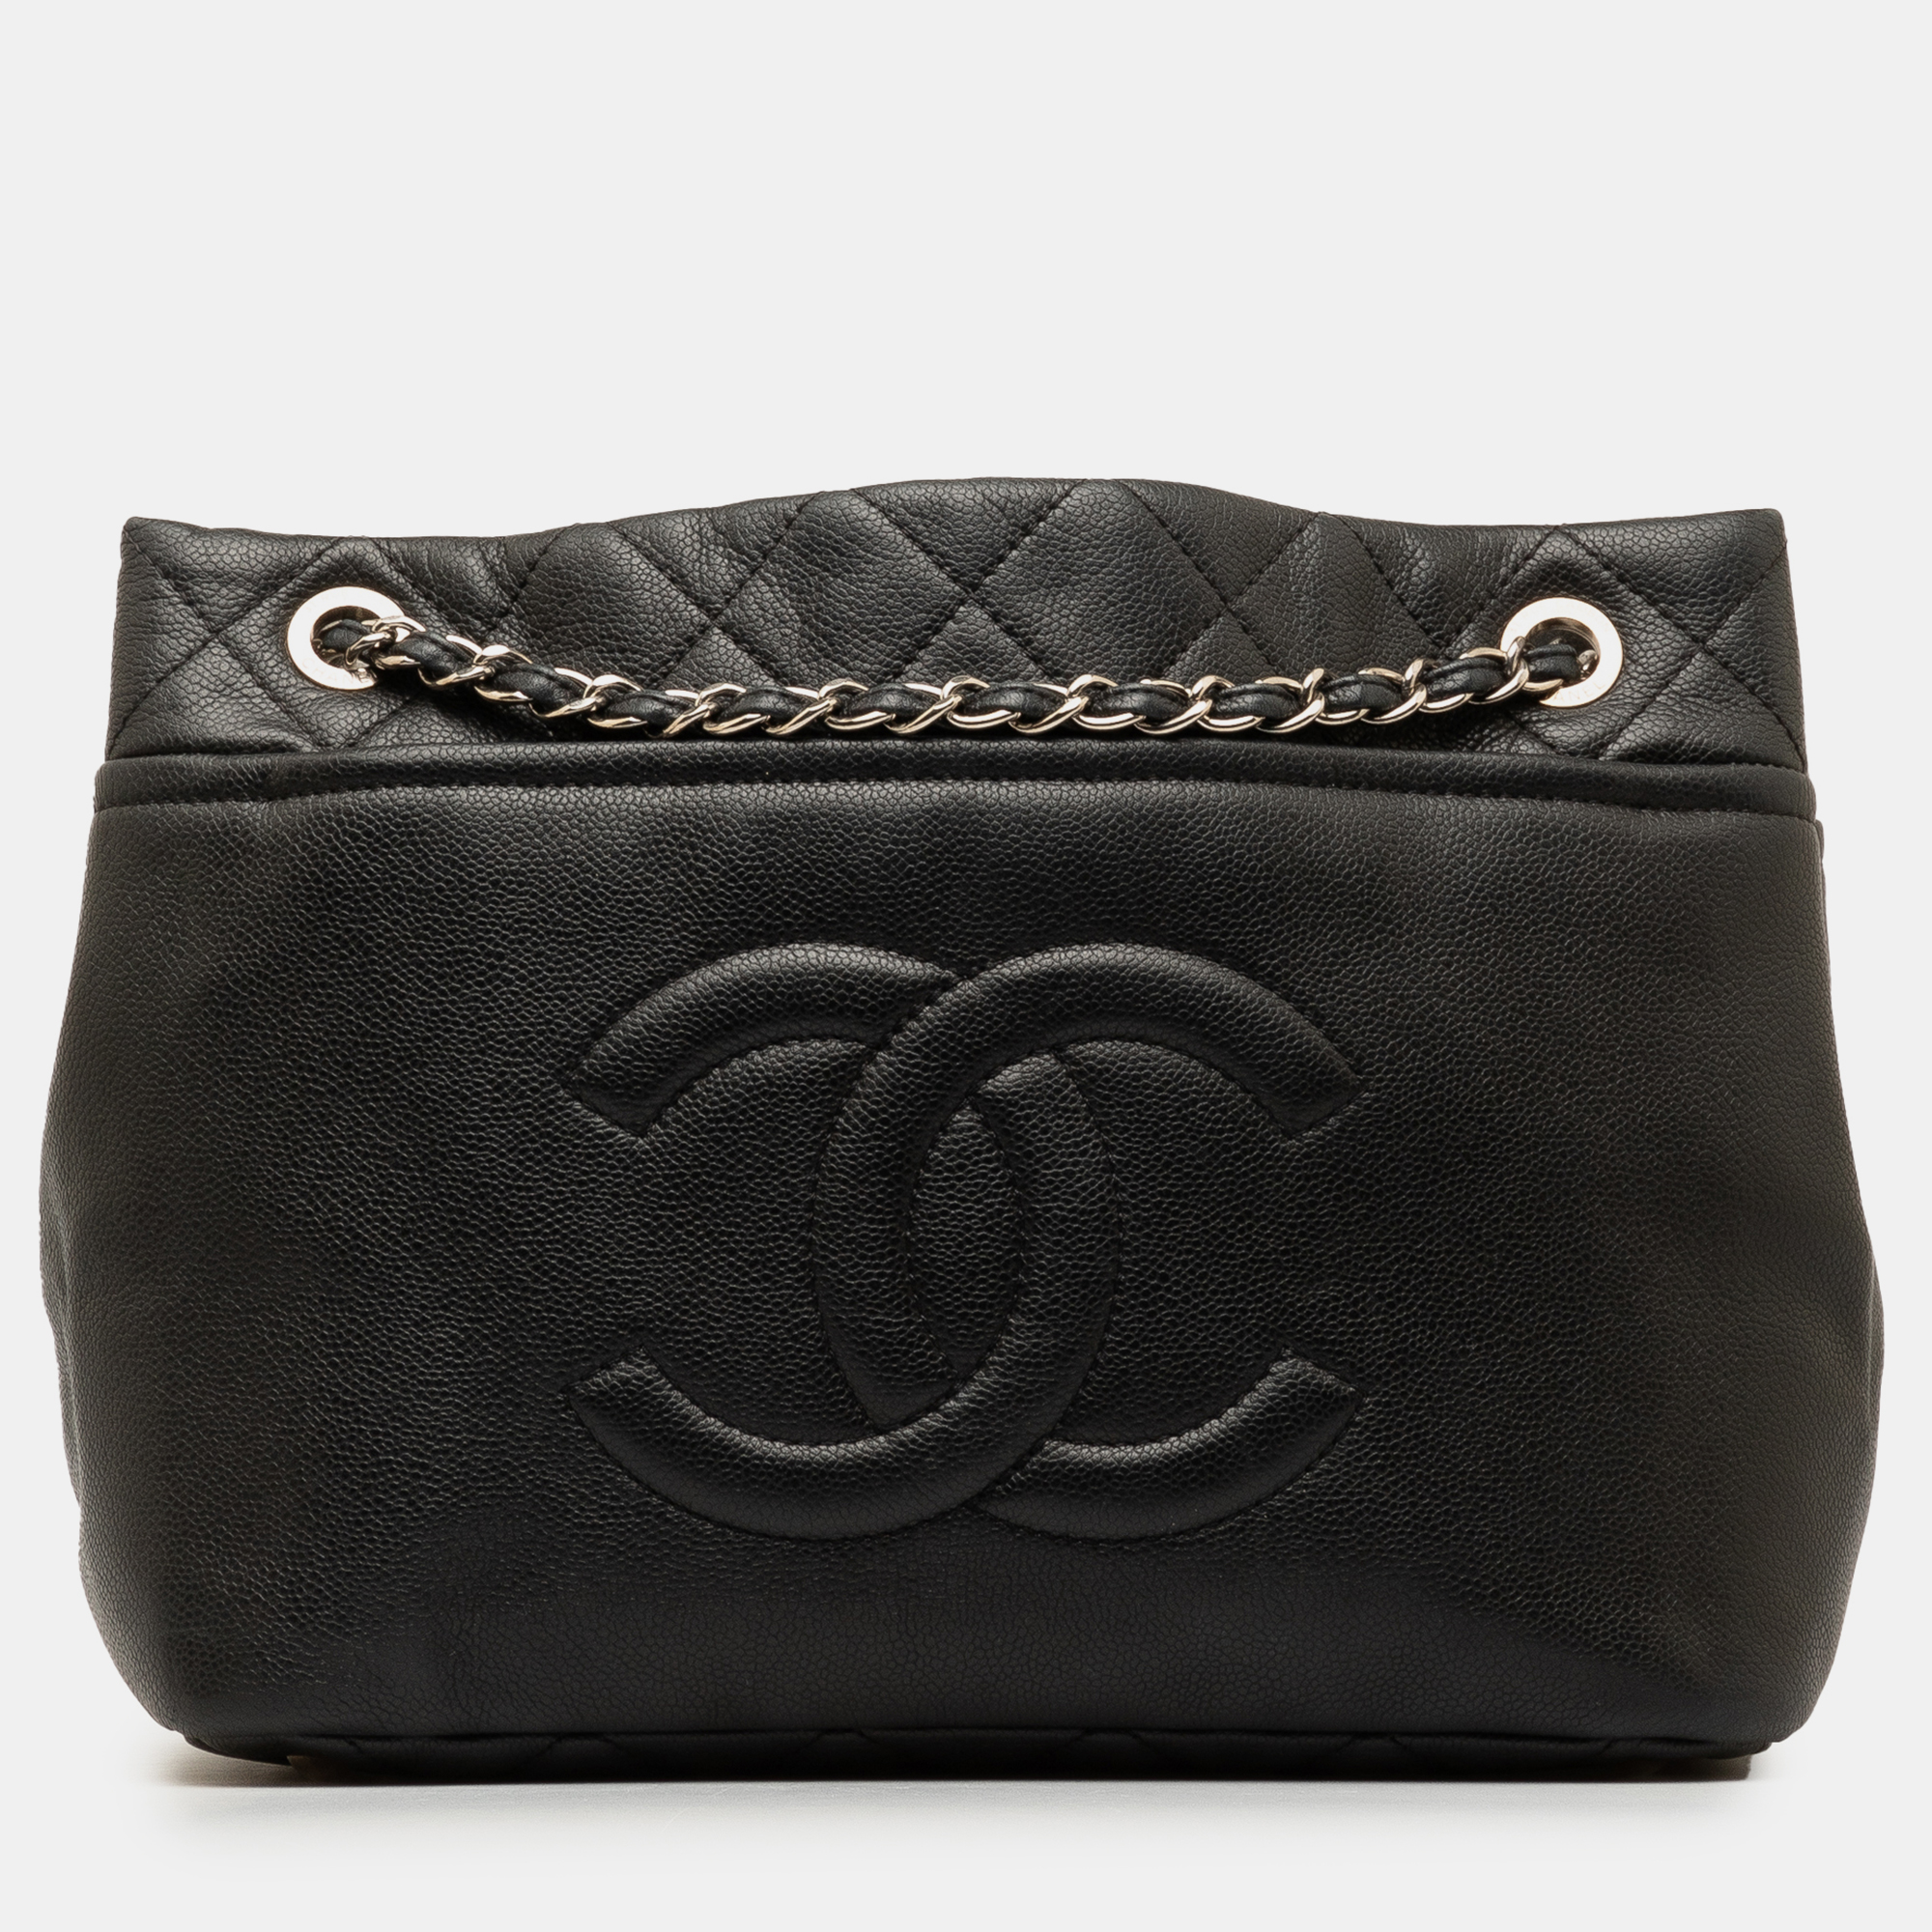 Chanel timeless cc caviar soft shopping tote